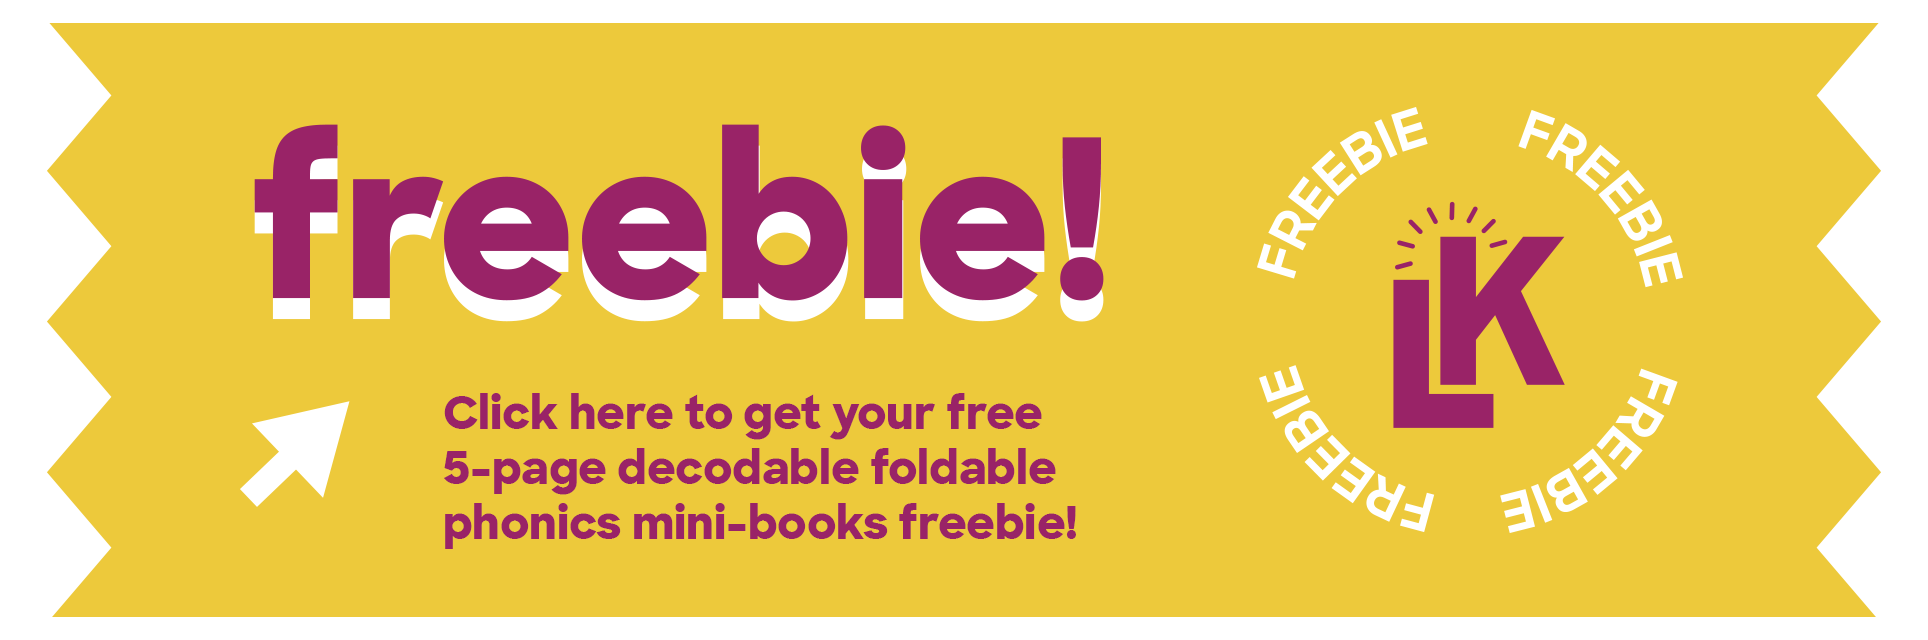 Click here to get your freebie!